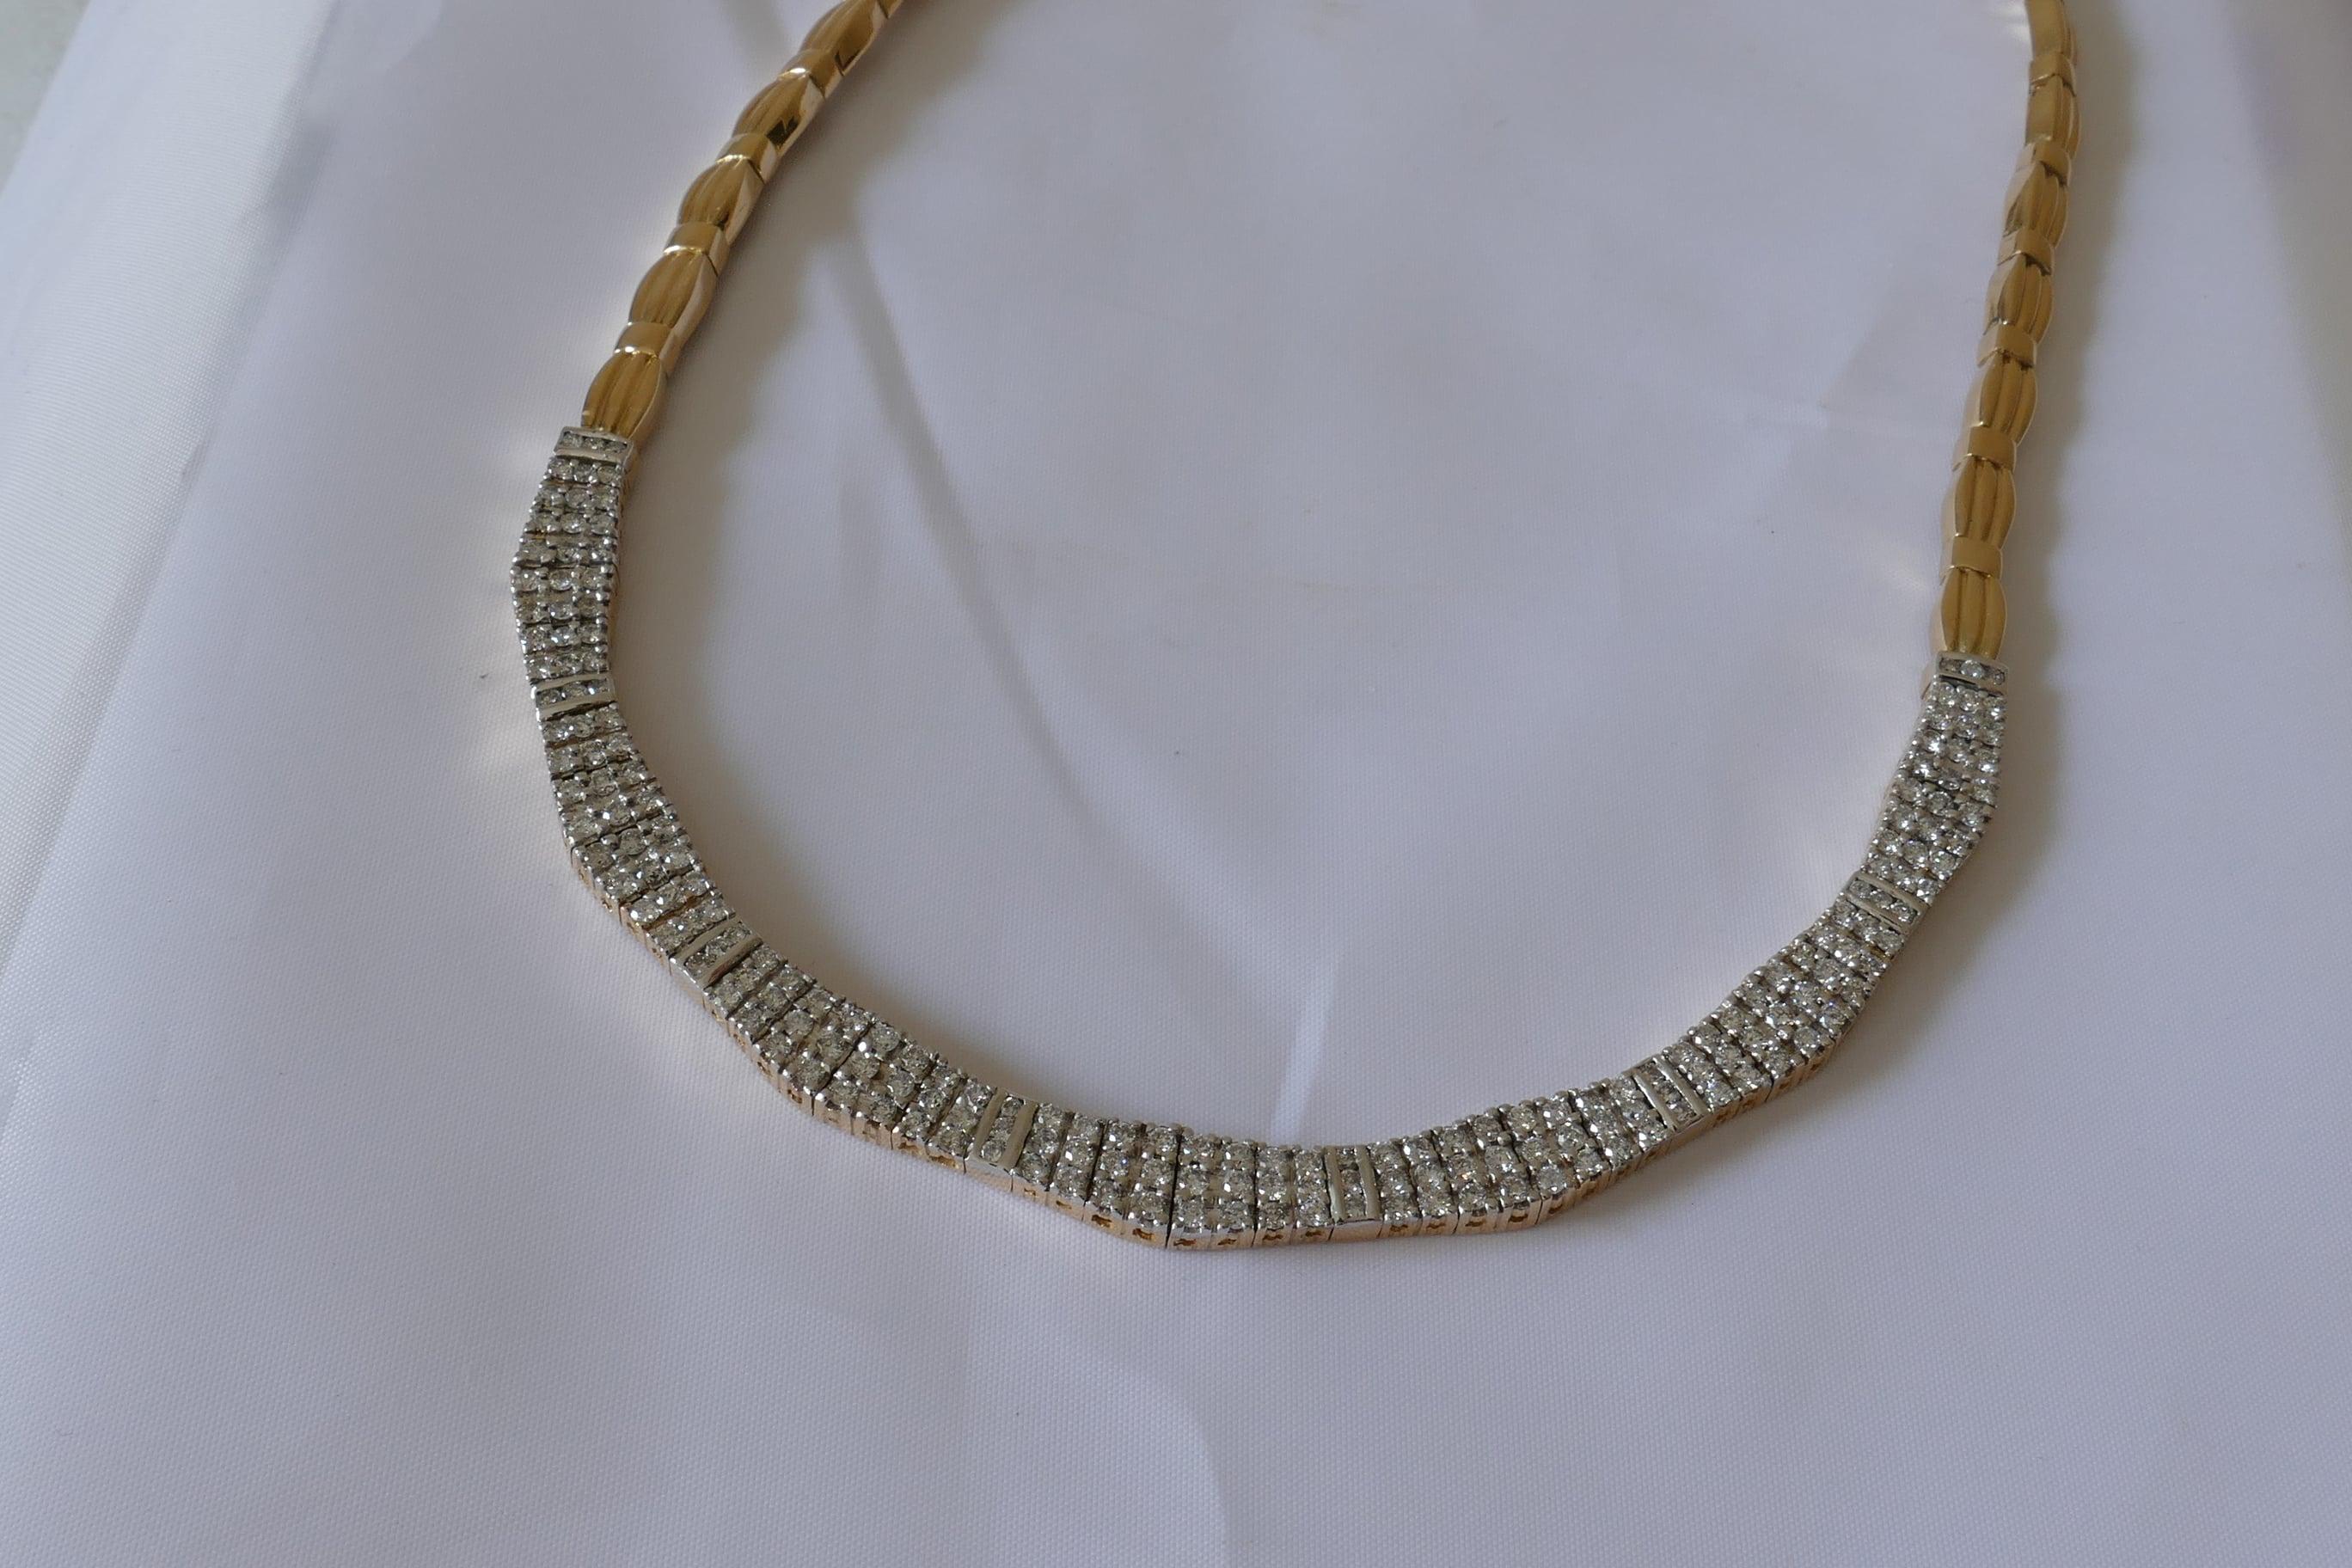 24 Round Brilliant Cut Diamonds high carat level colour of F-G, Clarity SI-1- to I-1, comprising nearly a half carat are Channel Set into this very attractive Necklace.
As well there are 168 Round Brilliant Cut  Diamonds of similar quality weighing